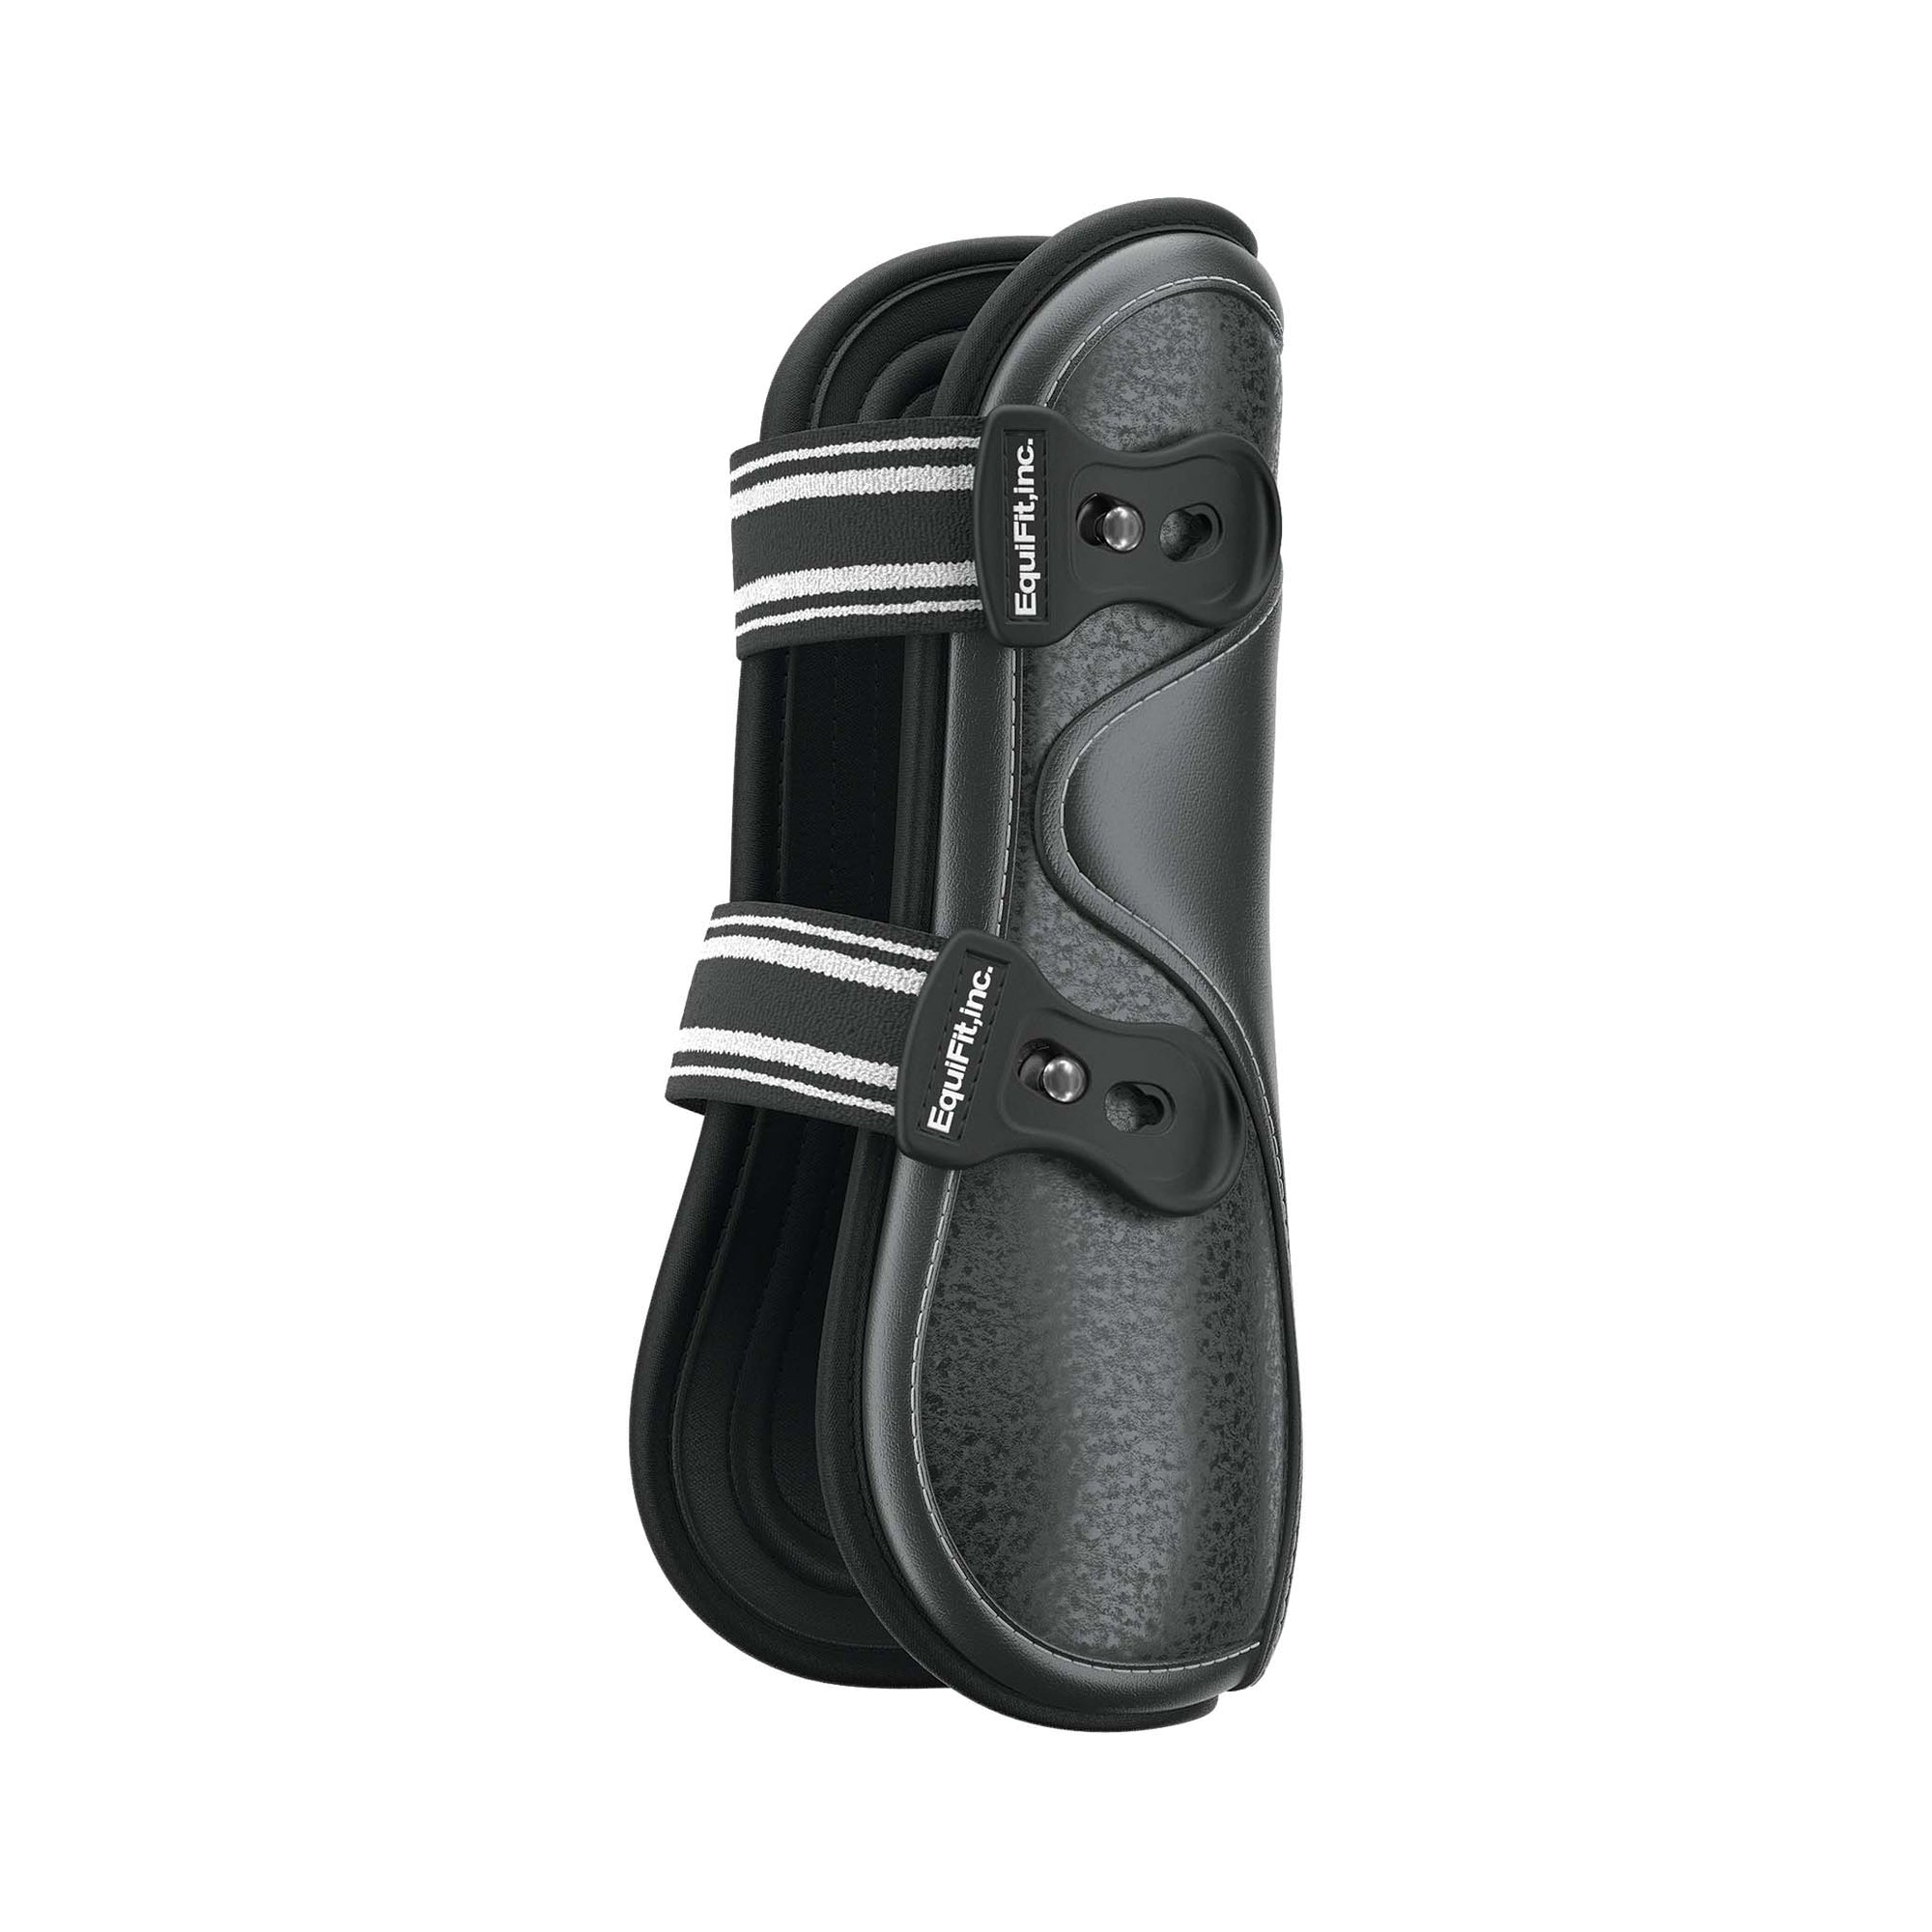 The D-Teq Pro2 Front Boot is designed with two StretchTeq™ straps